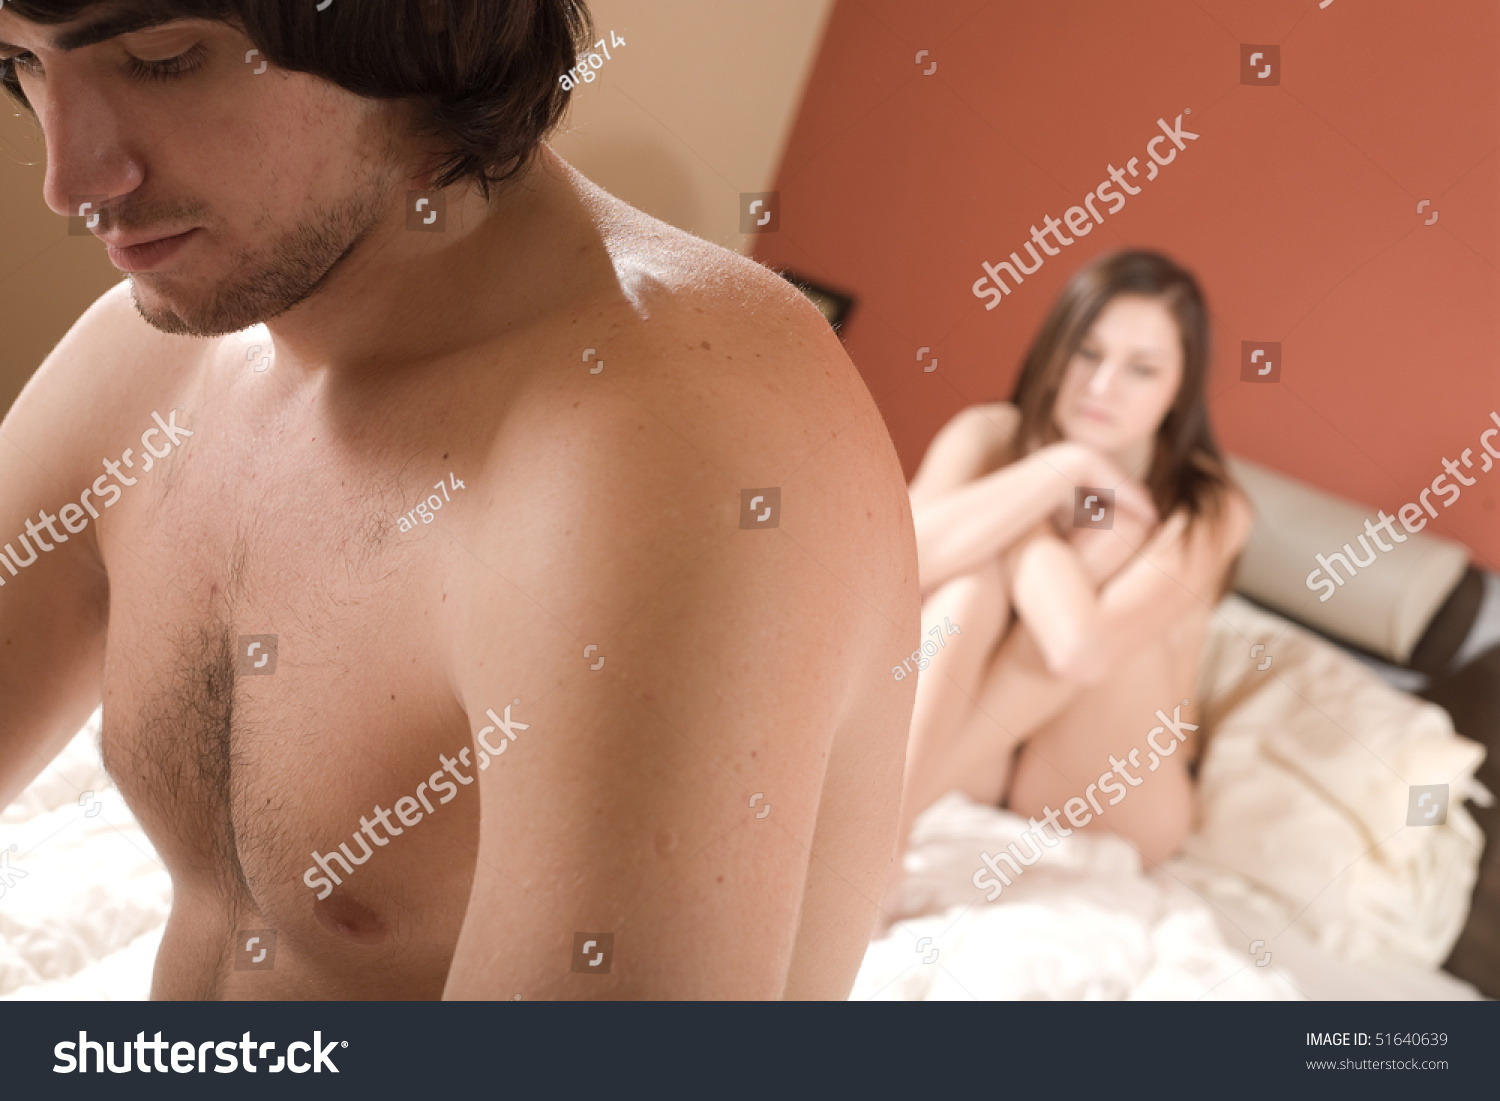 Naked girls and boys pictures Sexy Naked Girl Bed Boy Stock Photo Edit Now 51640639